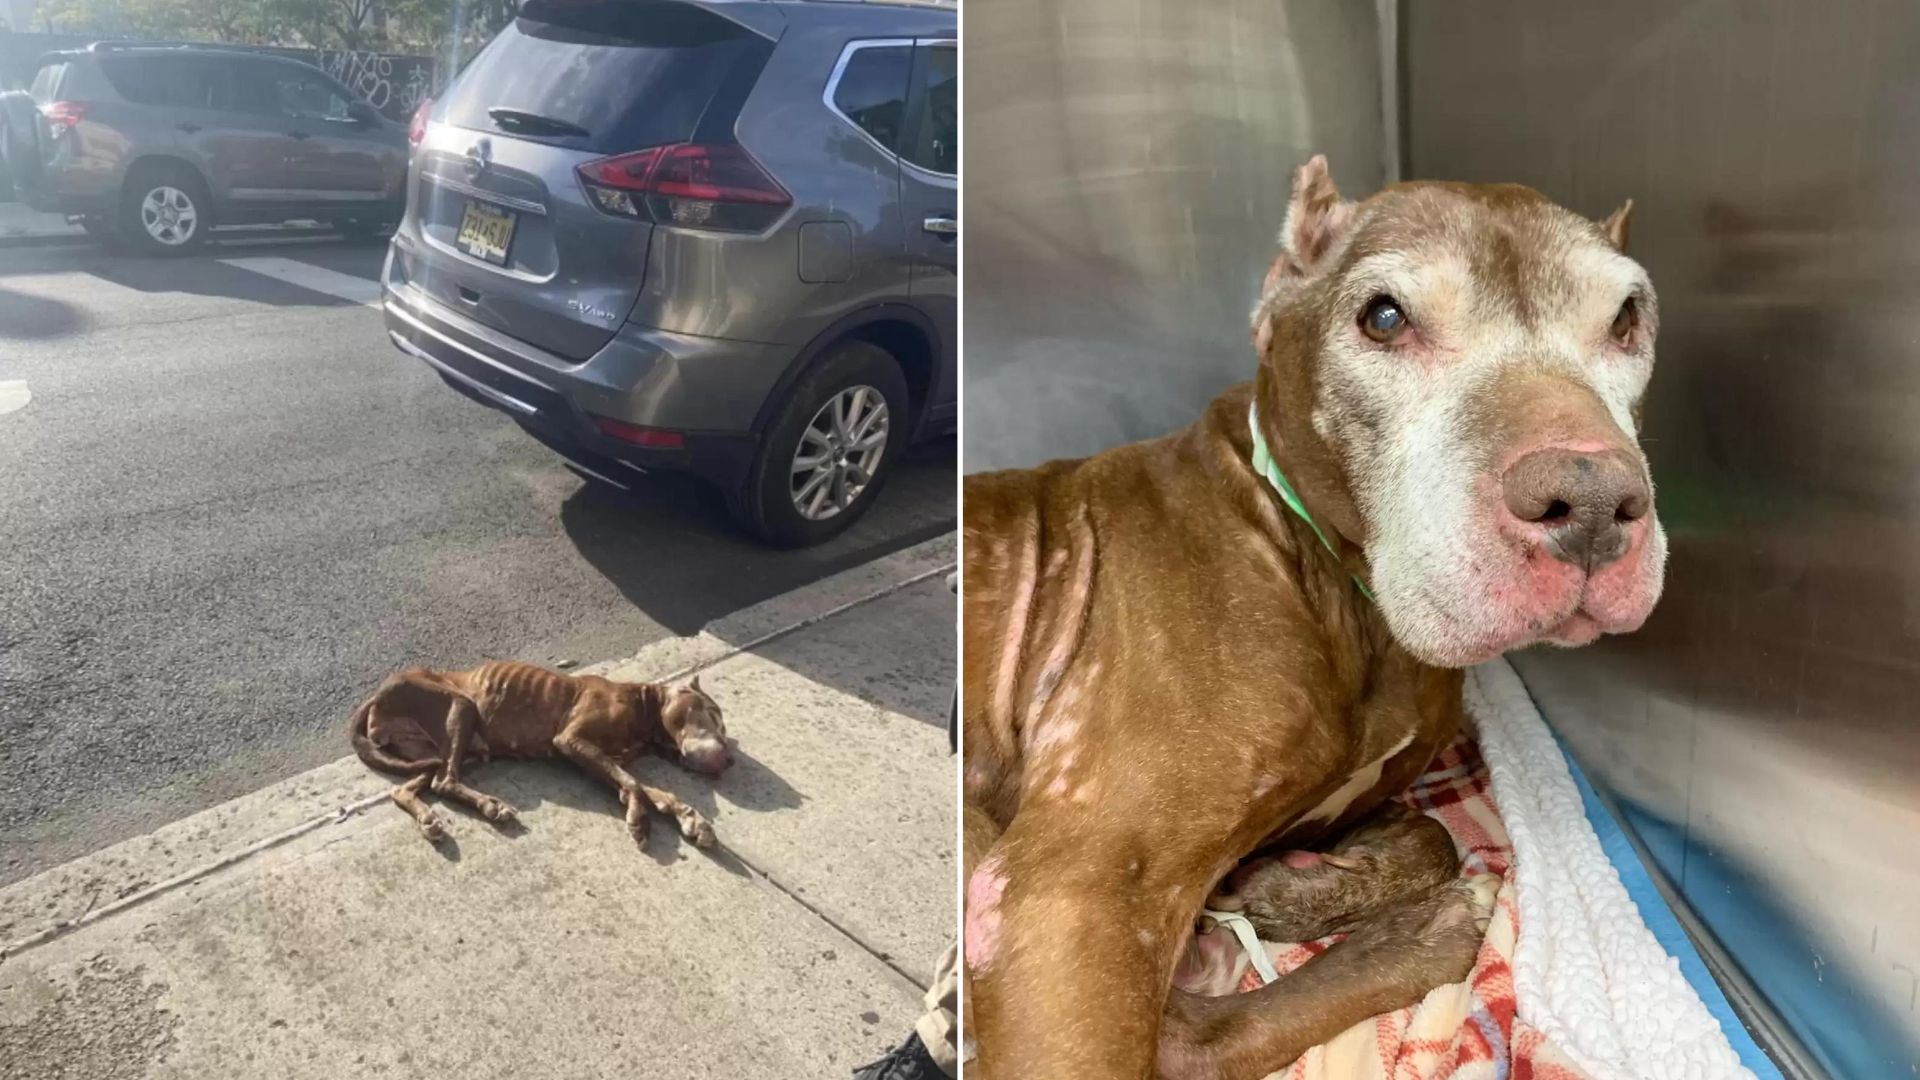 People Notice A Starving Pup Collapsed On The Sidewalk And Find Out That She Is Still Alive